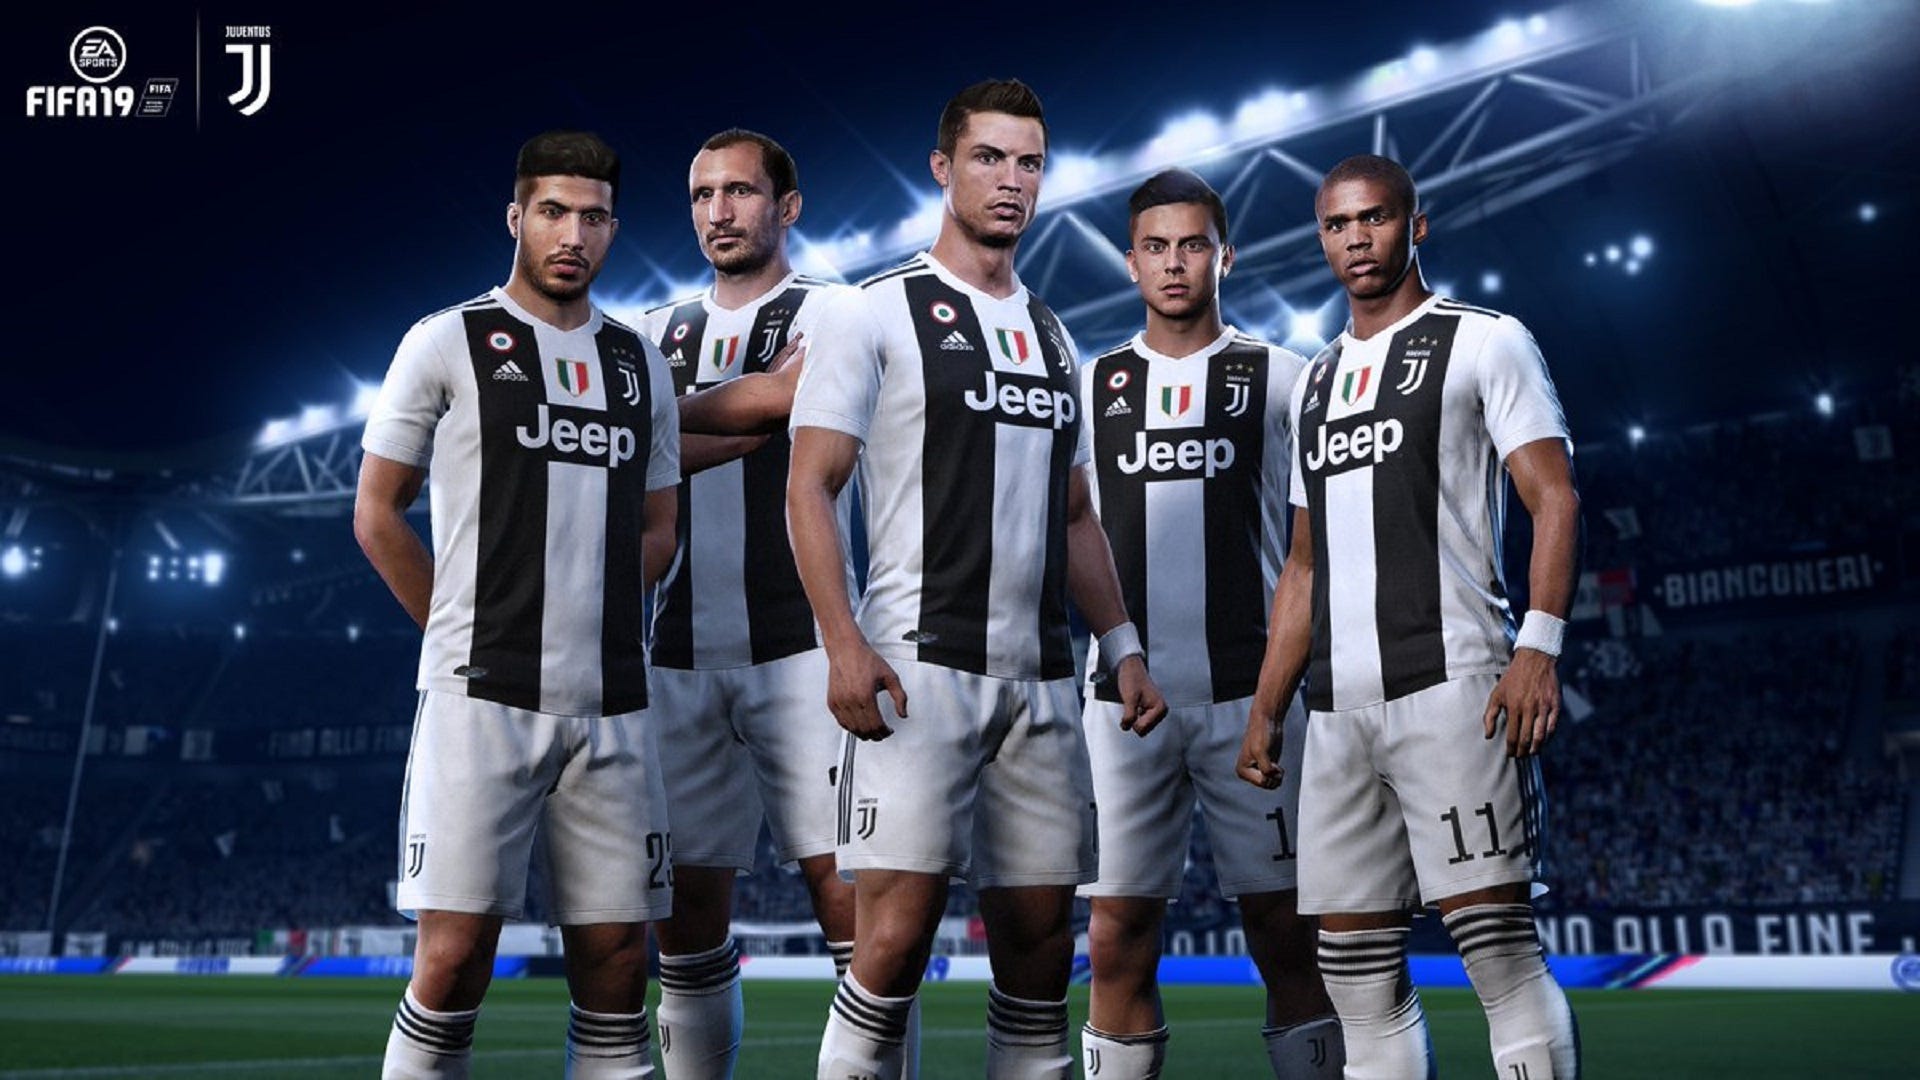 FIFA 19: What new features, teams & players will be on new game